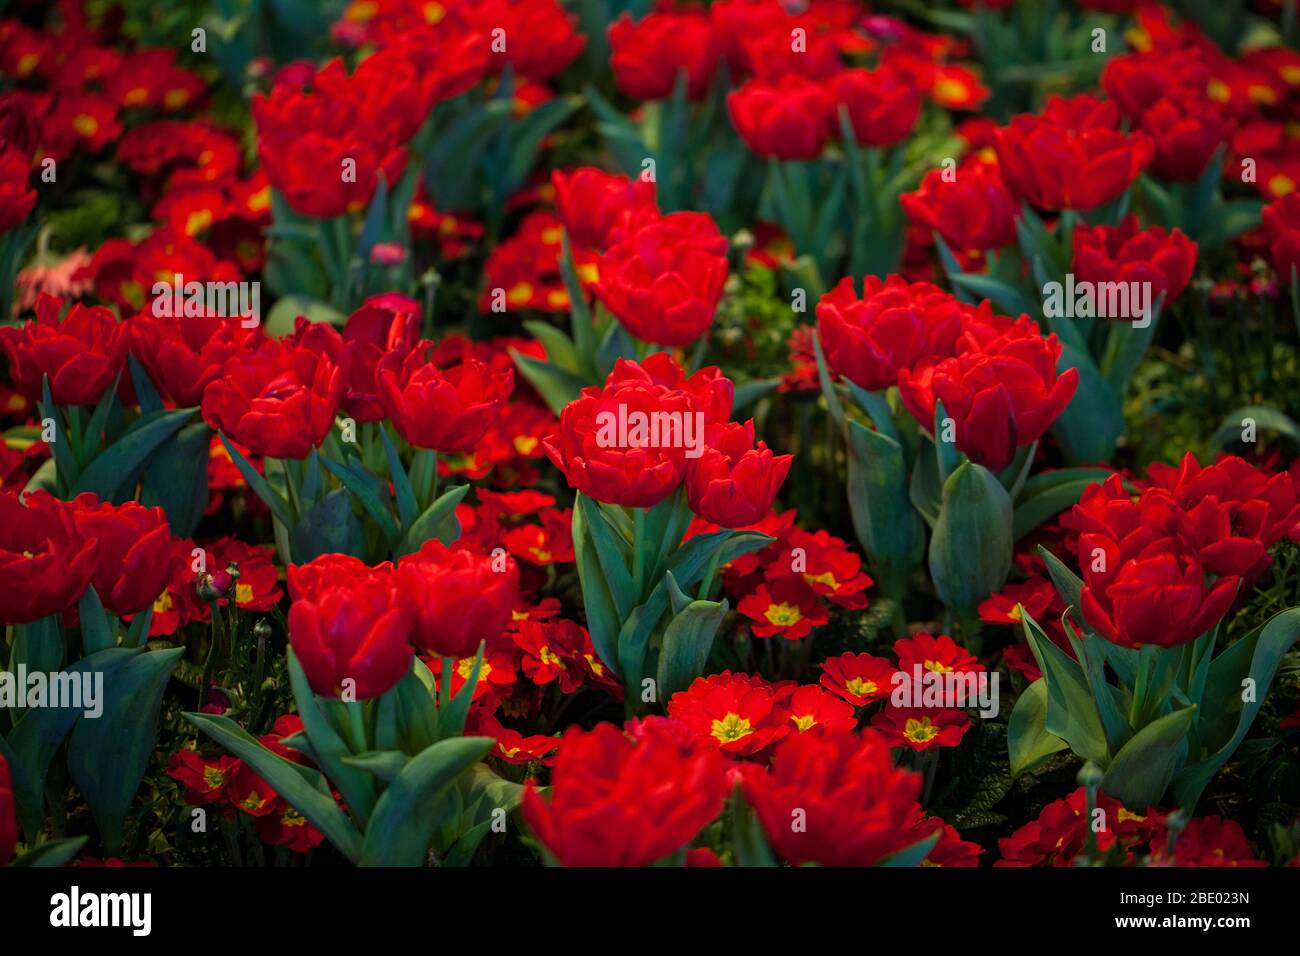 Red tulips and red primula flower bed Stock Photo